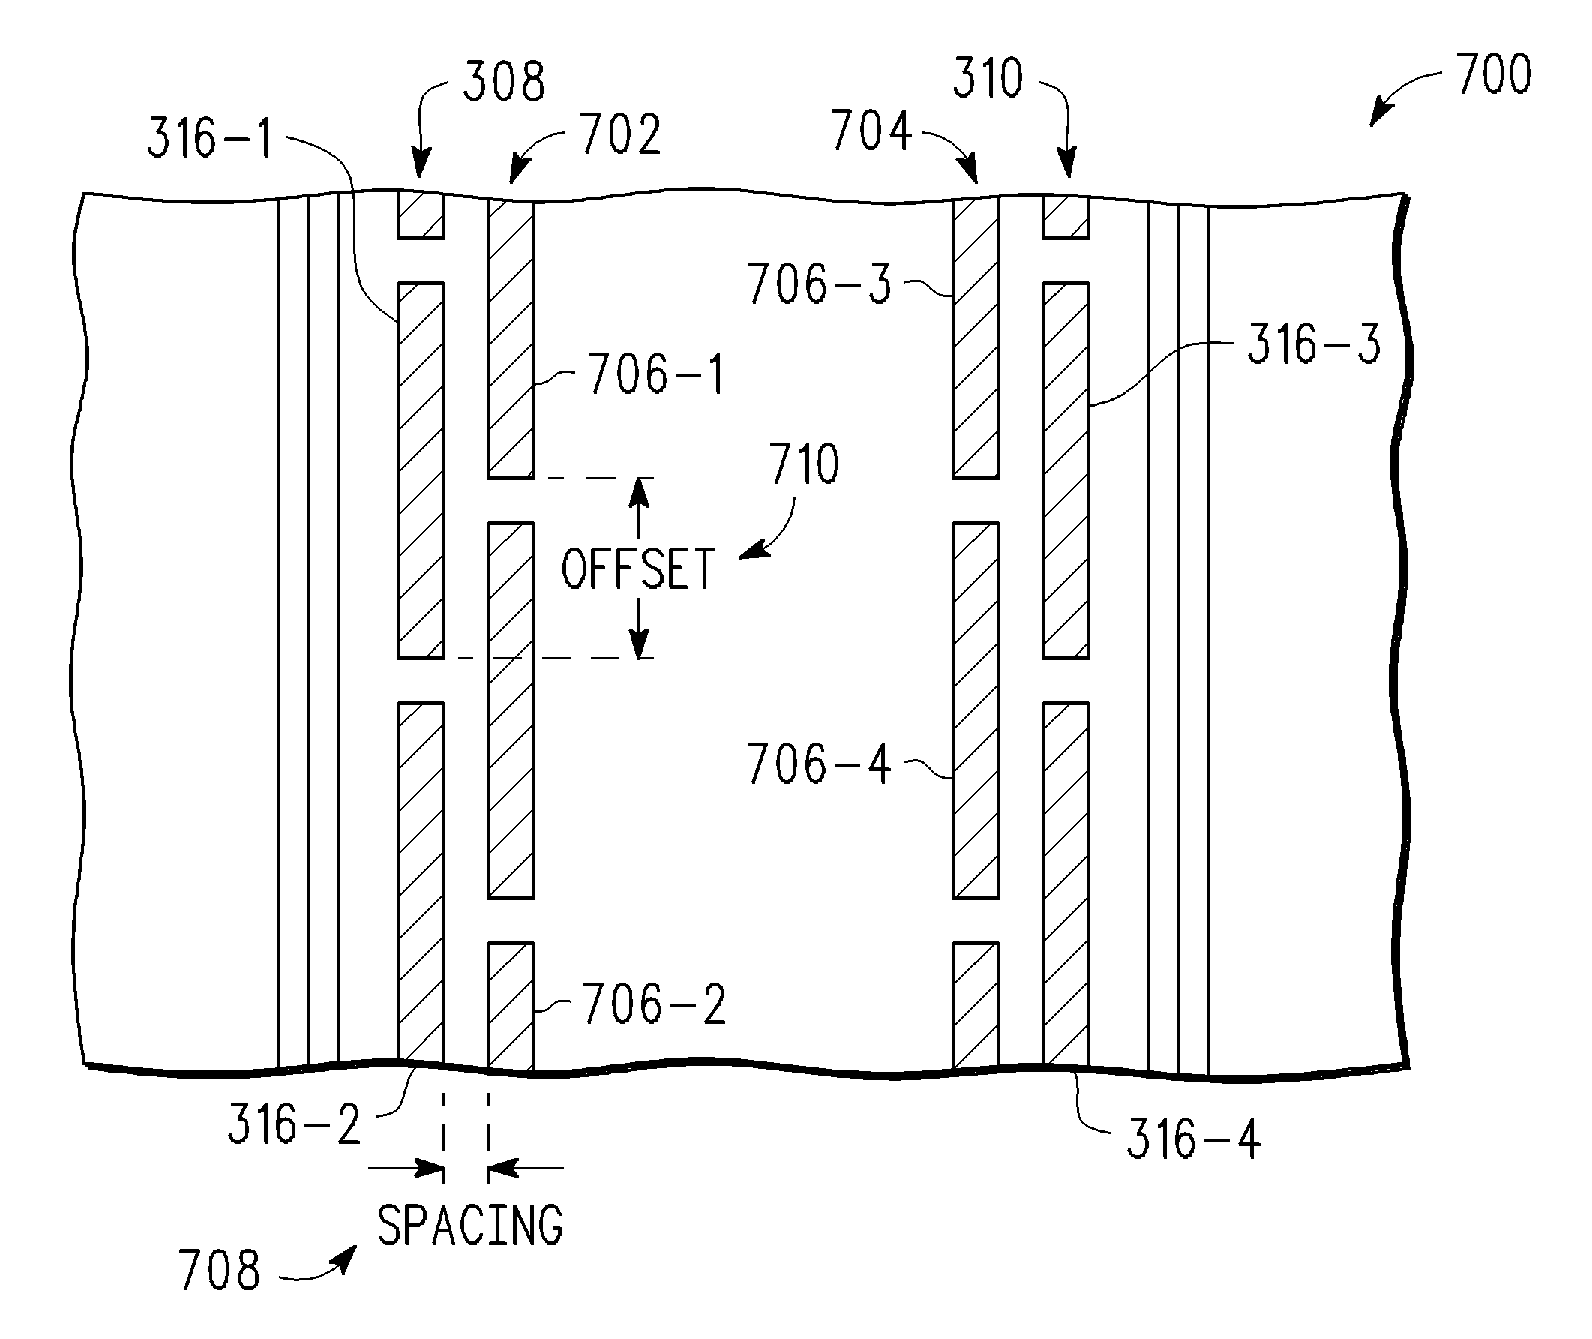 Semiconductor wafer with improved crack protection